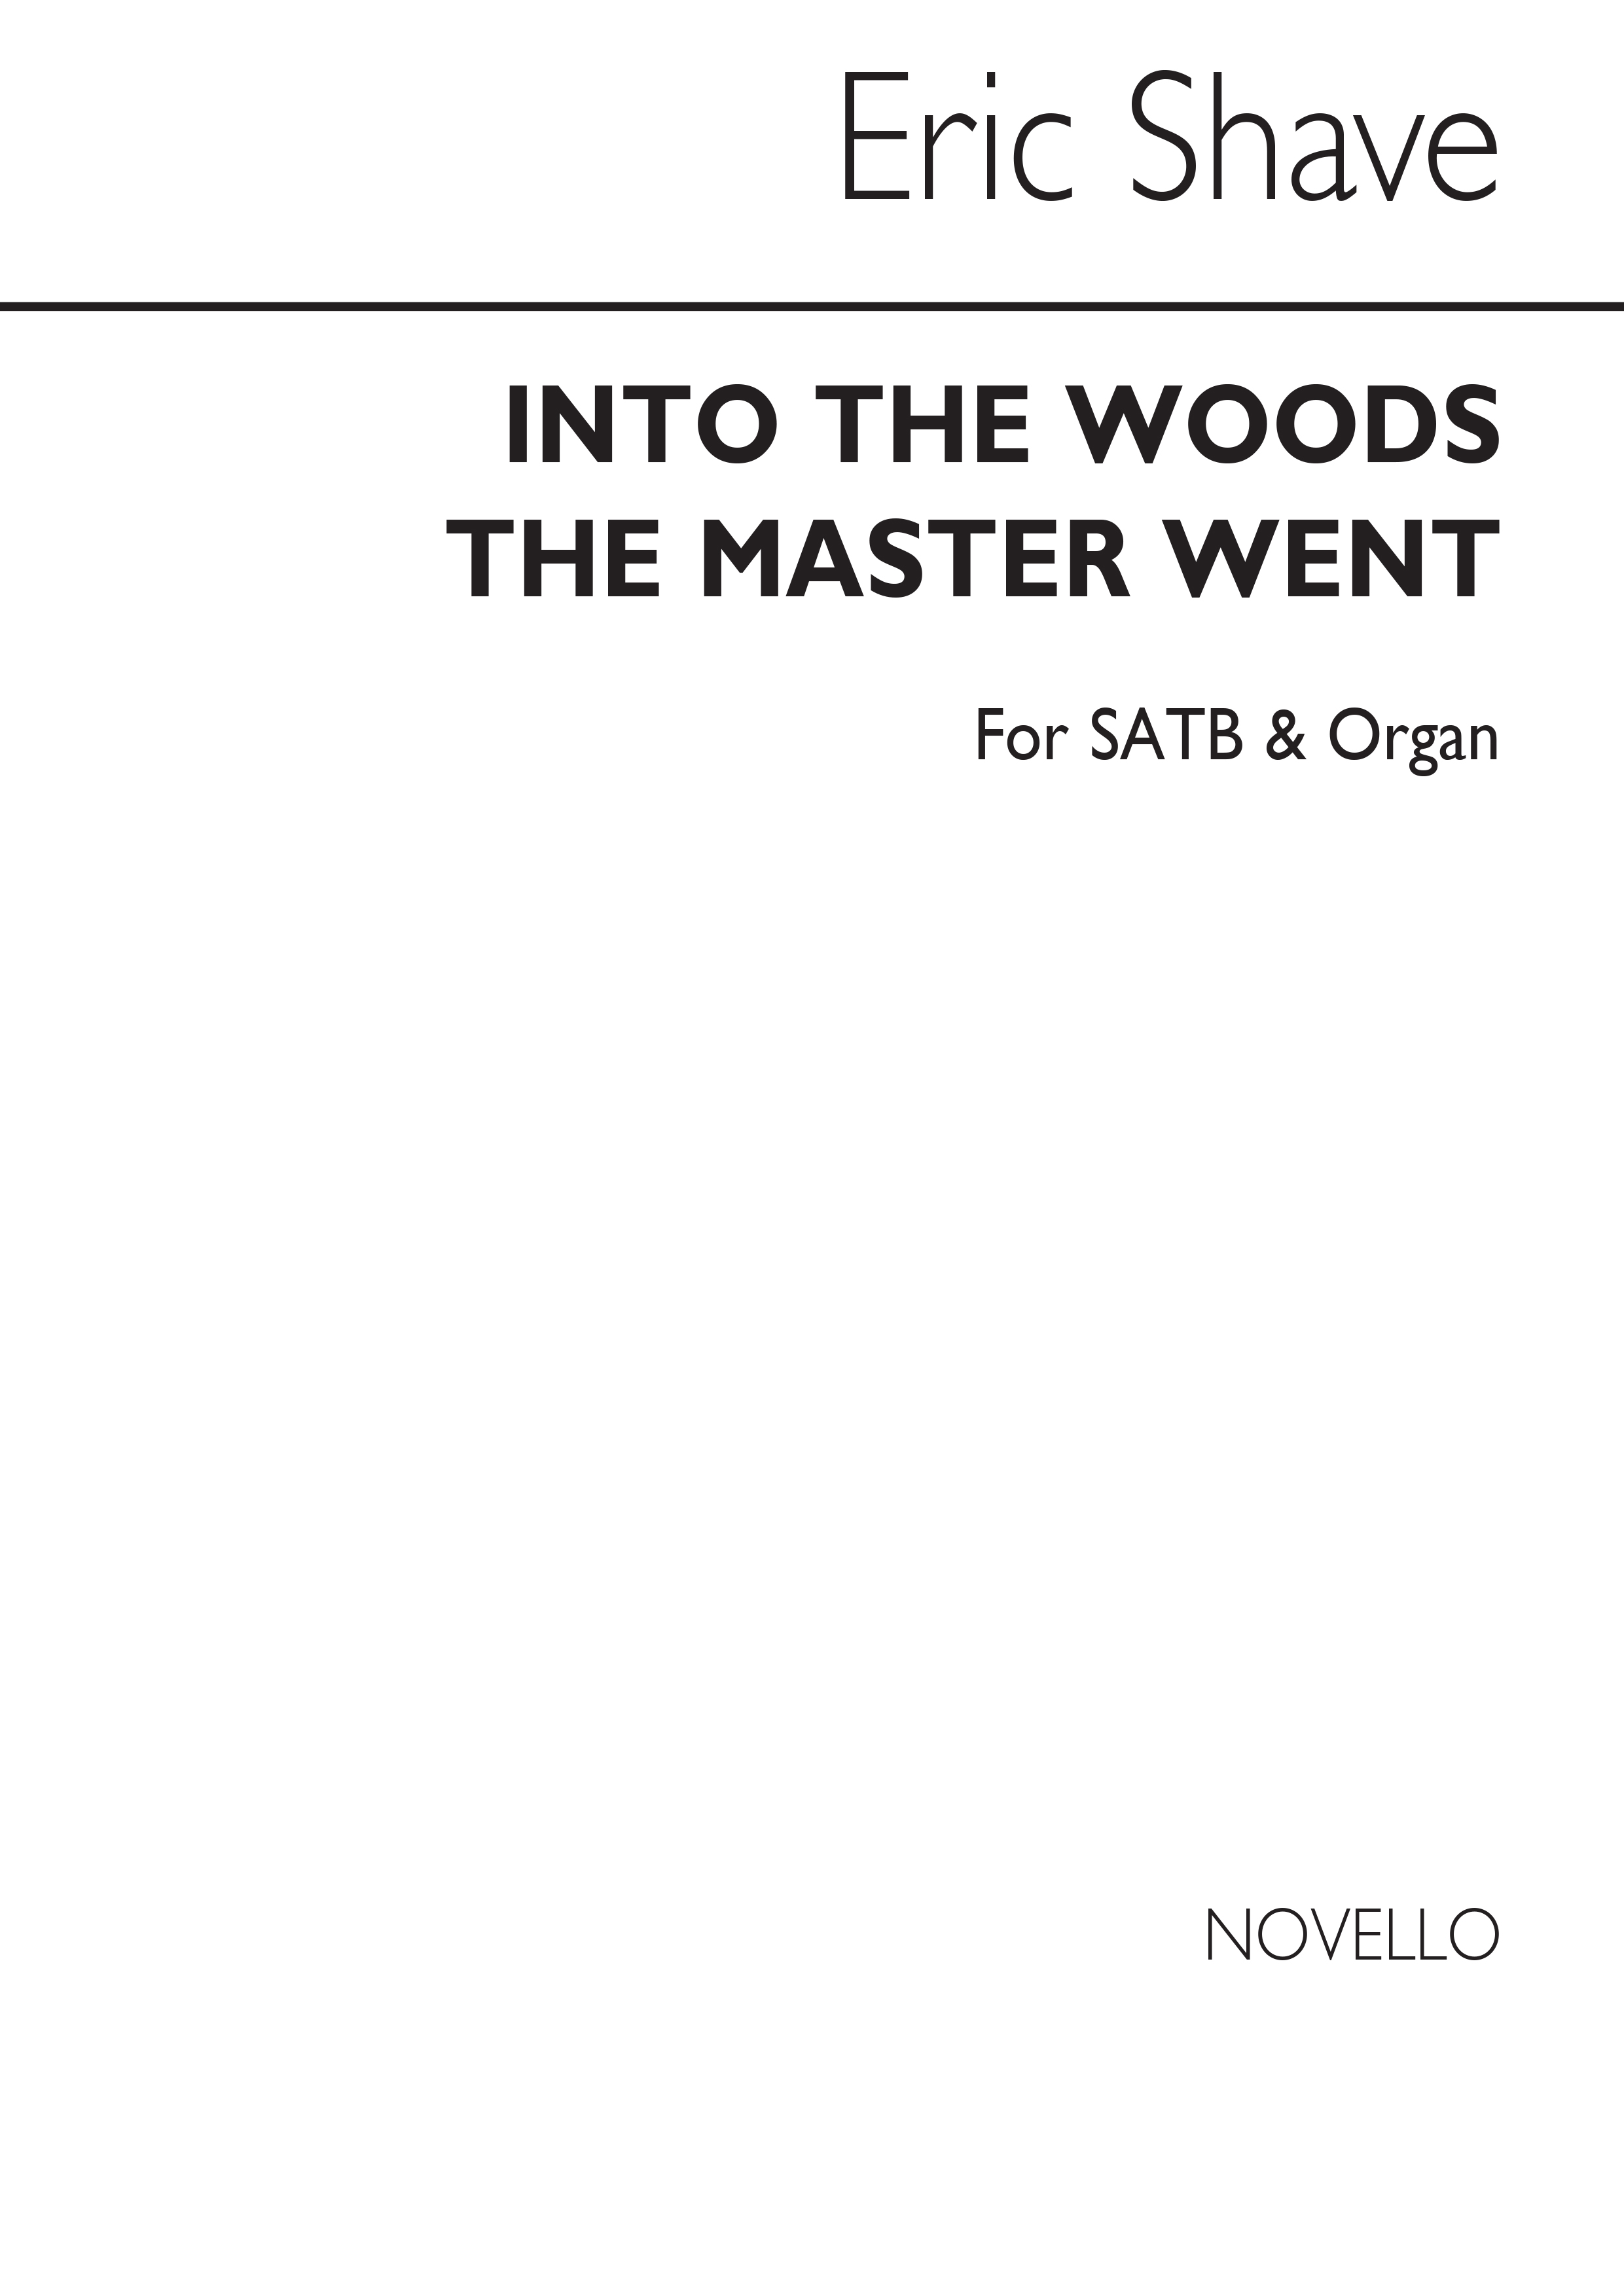 Shave: Into The Woods The Master Went for SATB Chorus